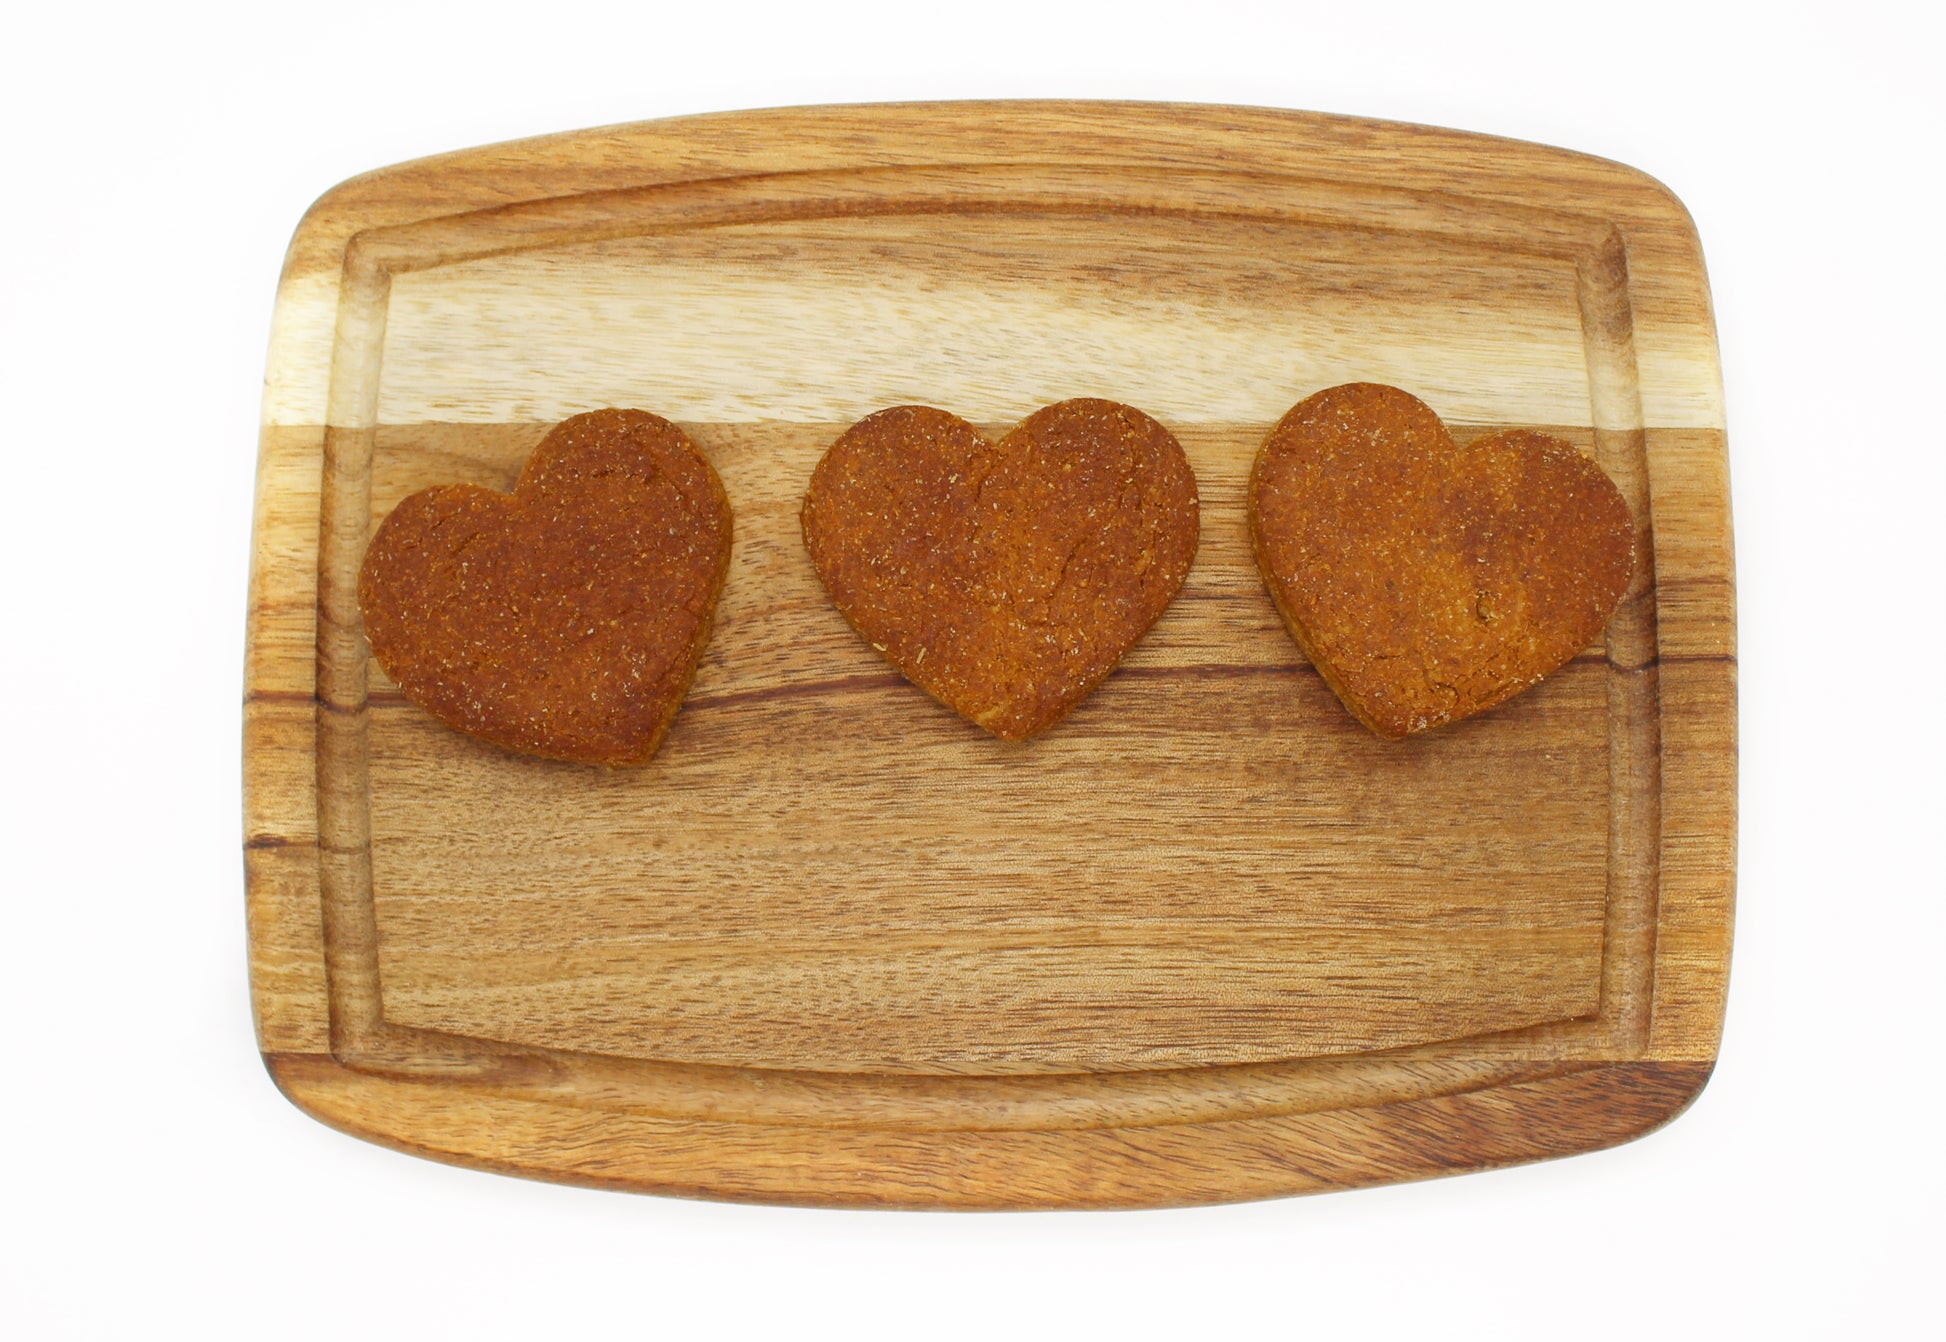 Three heart-shaped peanut butter and banana flavored dog biscuits laid out in a single line on a cutting board.